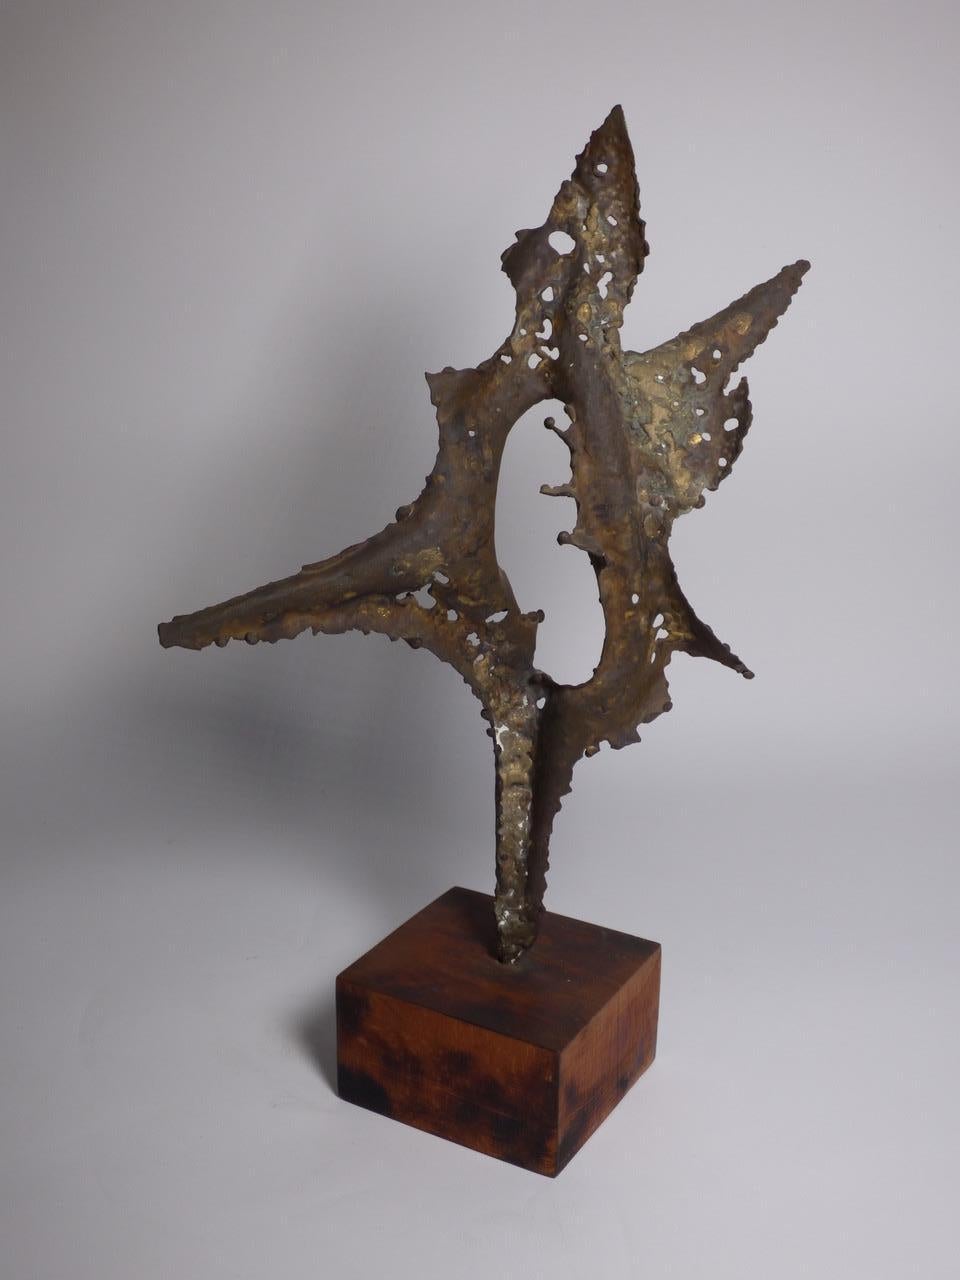 Beautiful sculpture in iron and with wooden base designed by Nino Franchina, 1958, Italy. Unique piece.